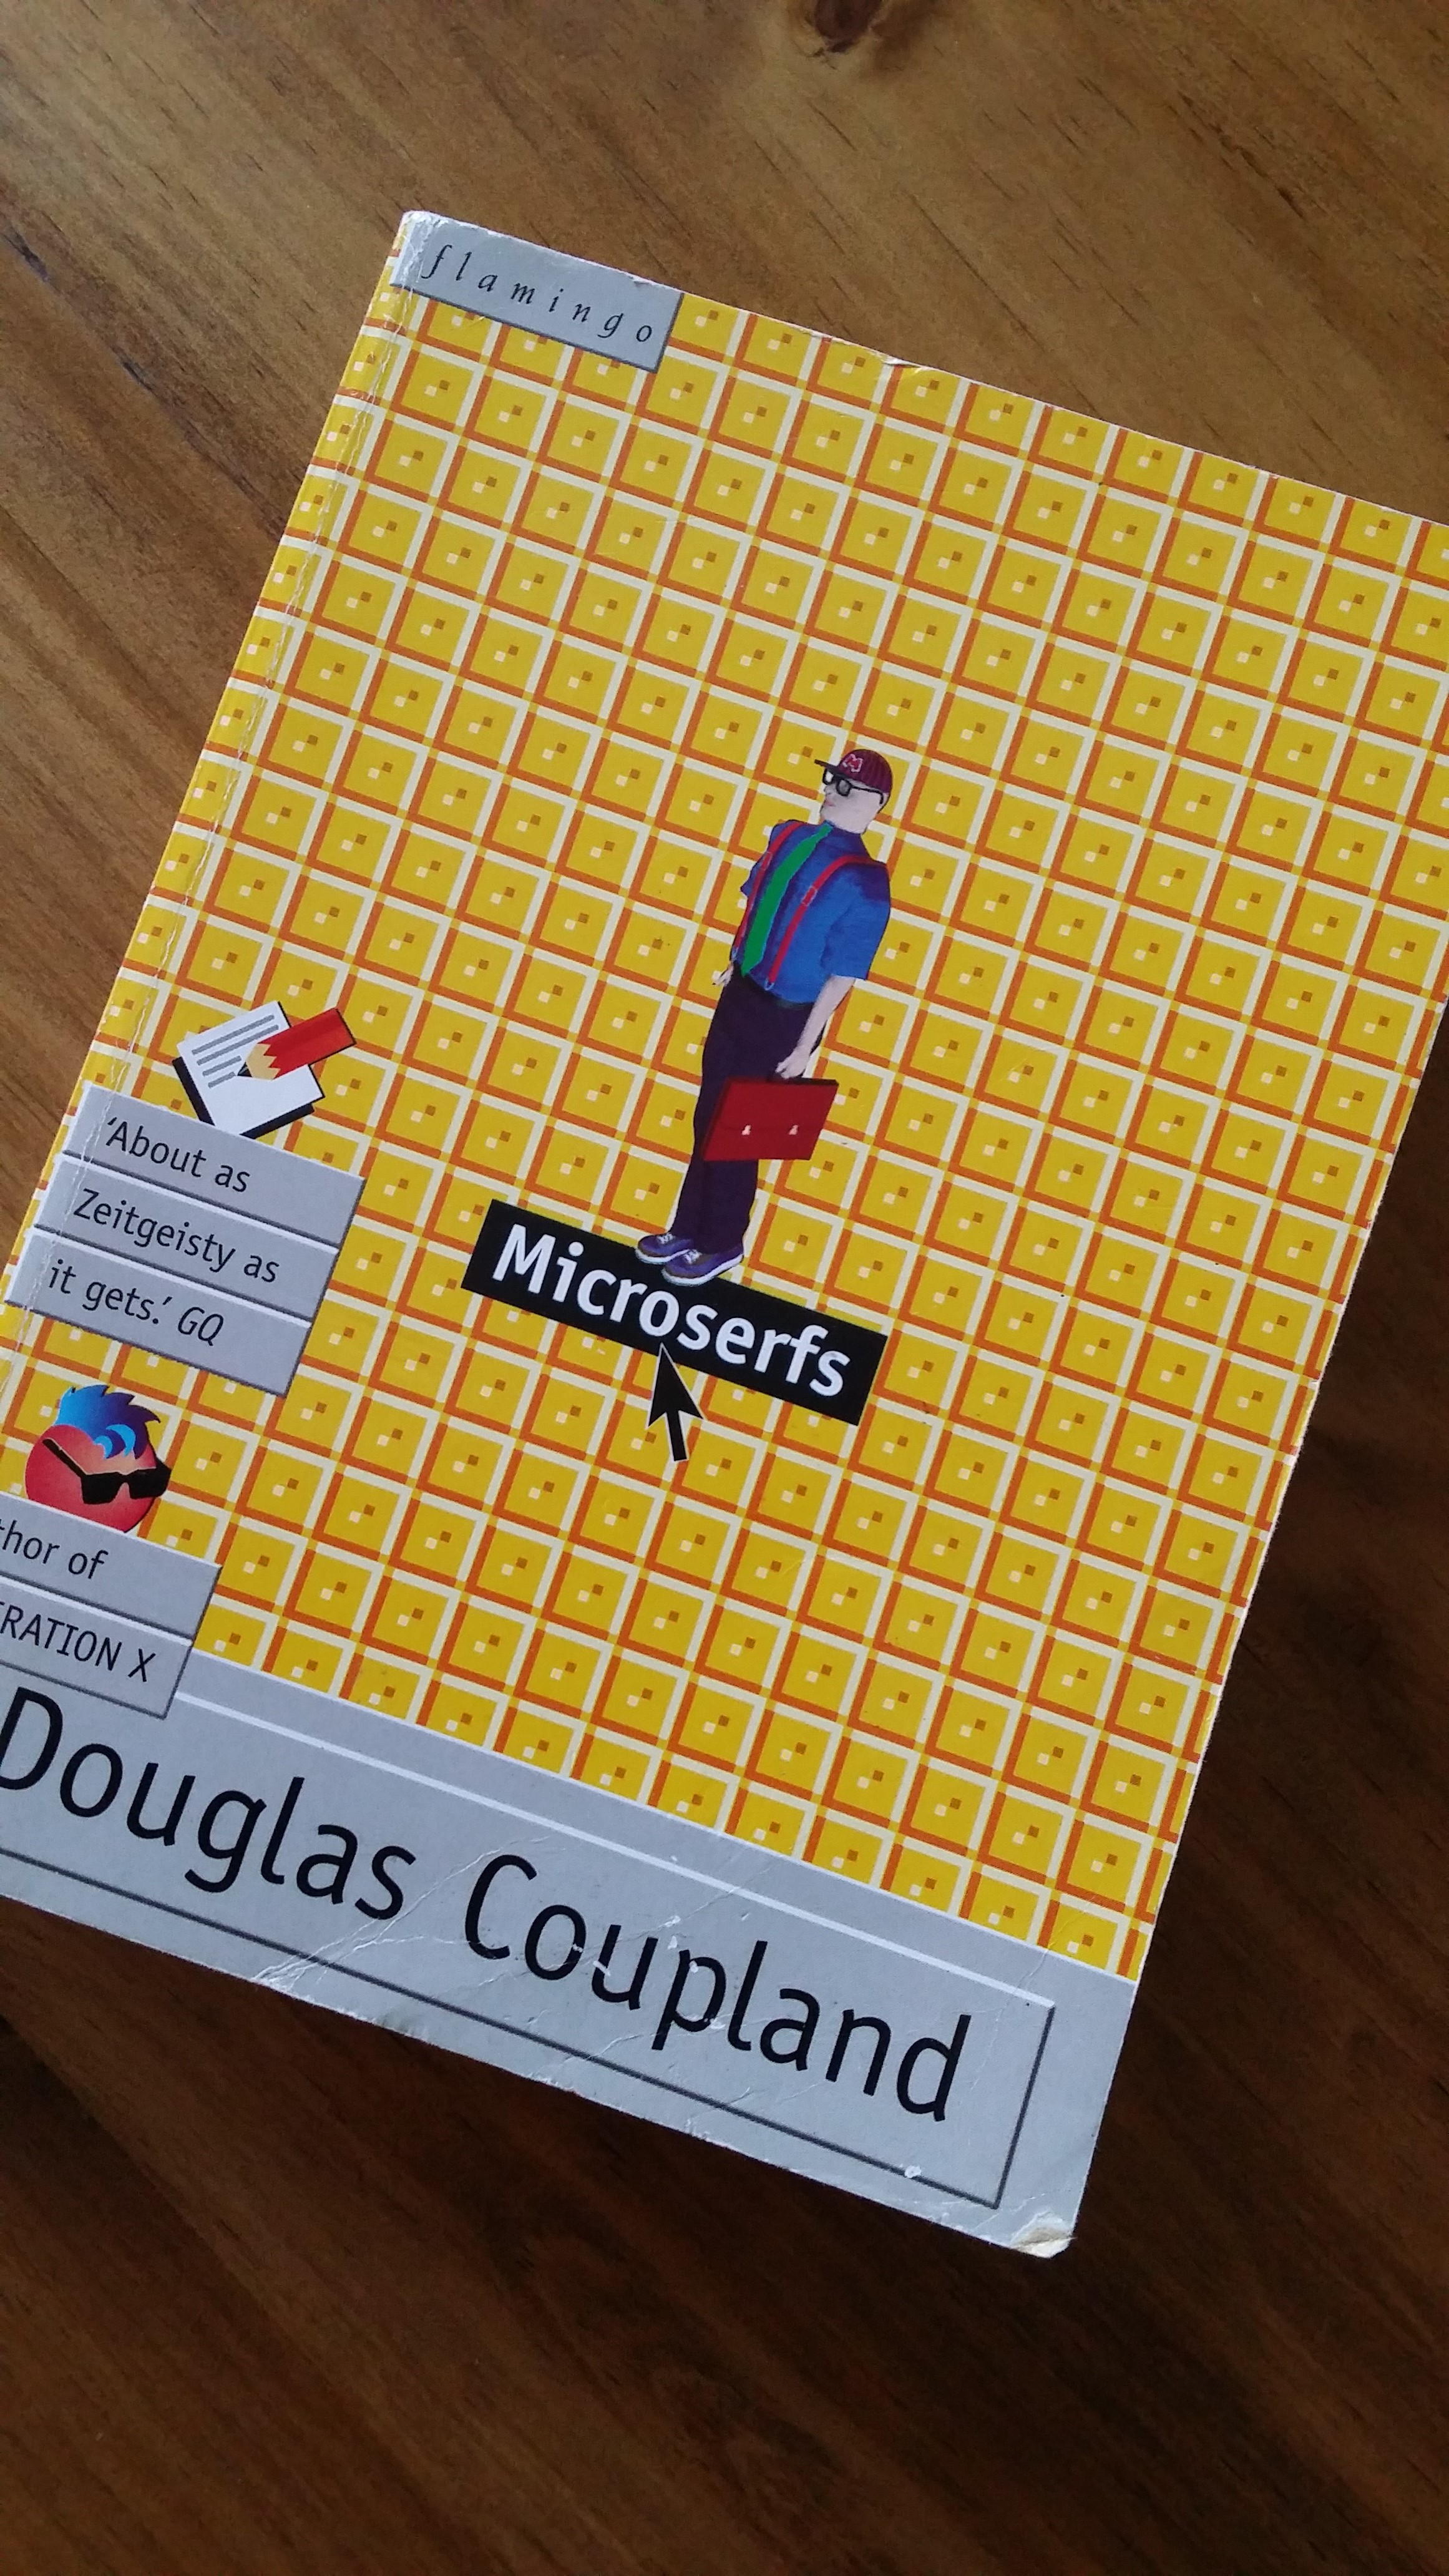 Photo of Microserfs by Douglas Coupland